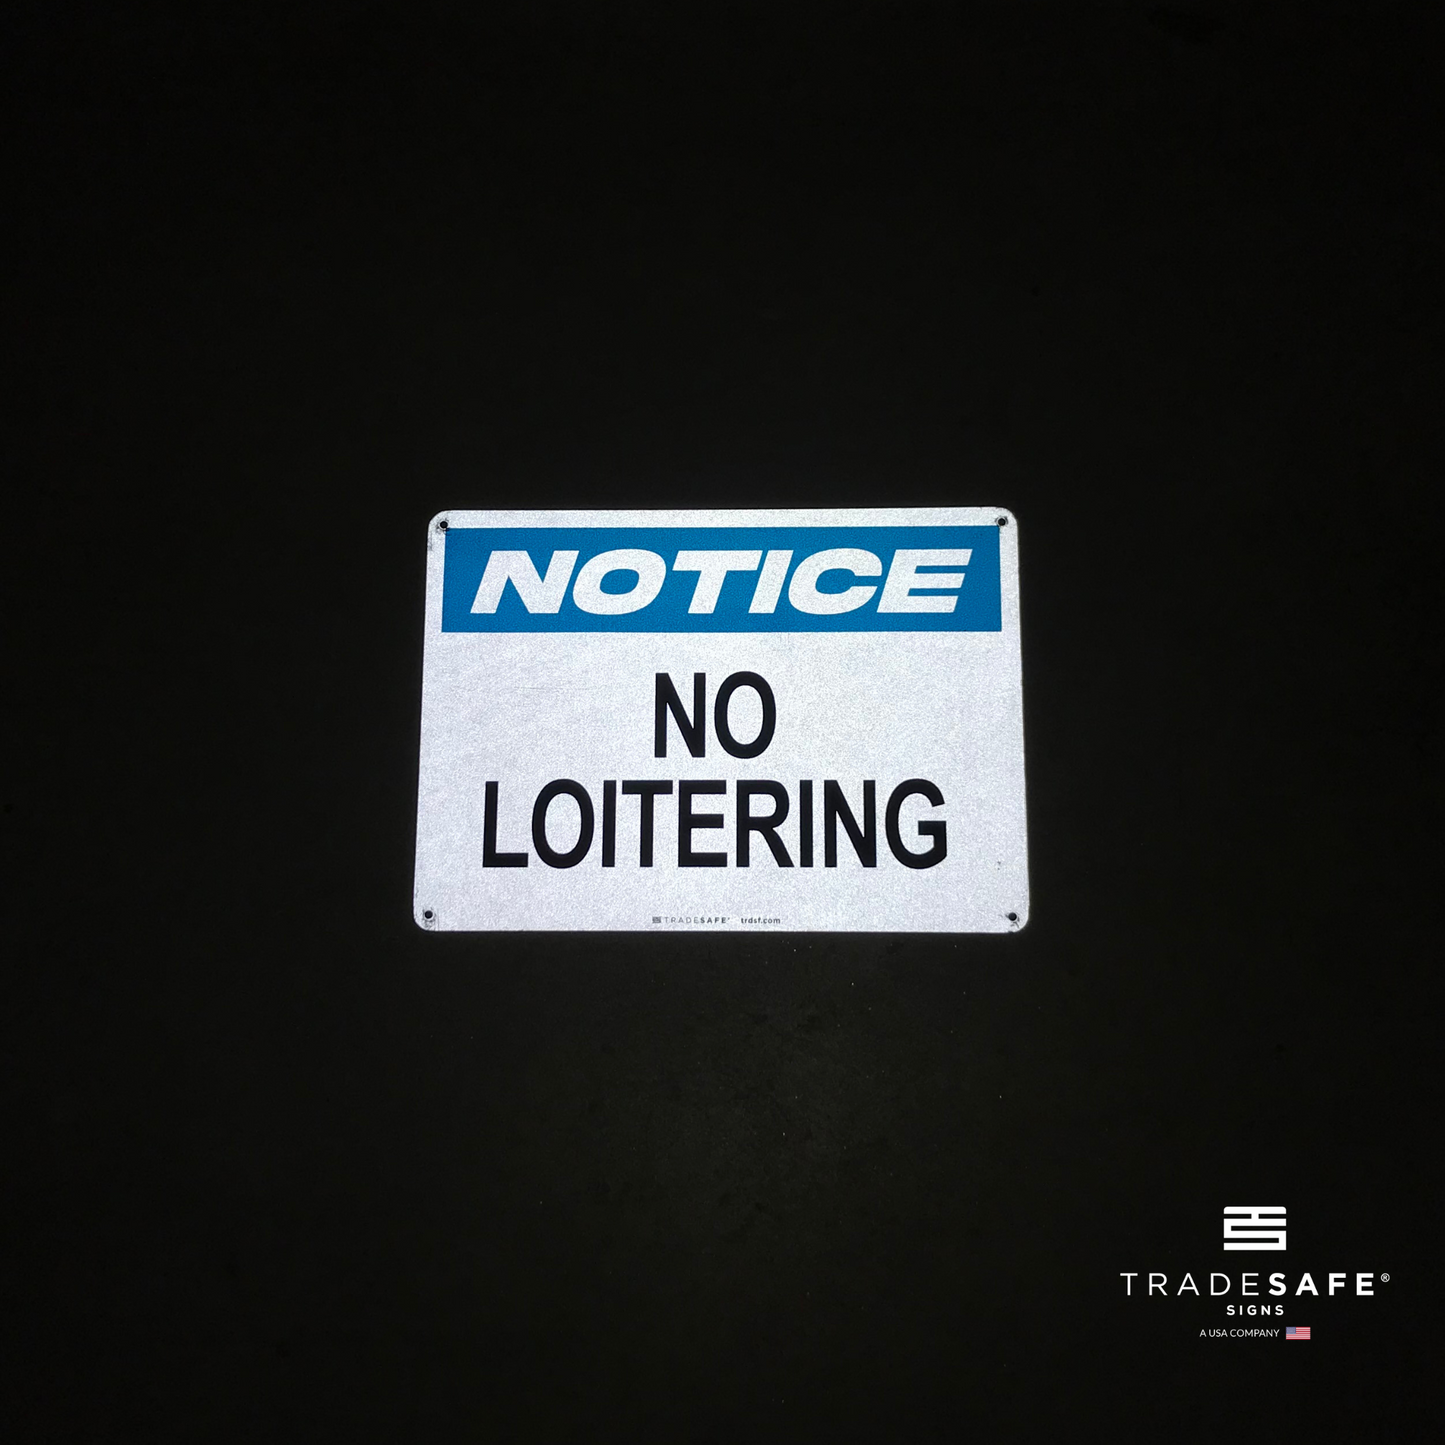 reflective attribute of no loitering sign on black background